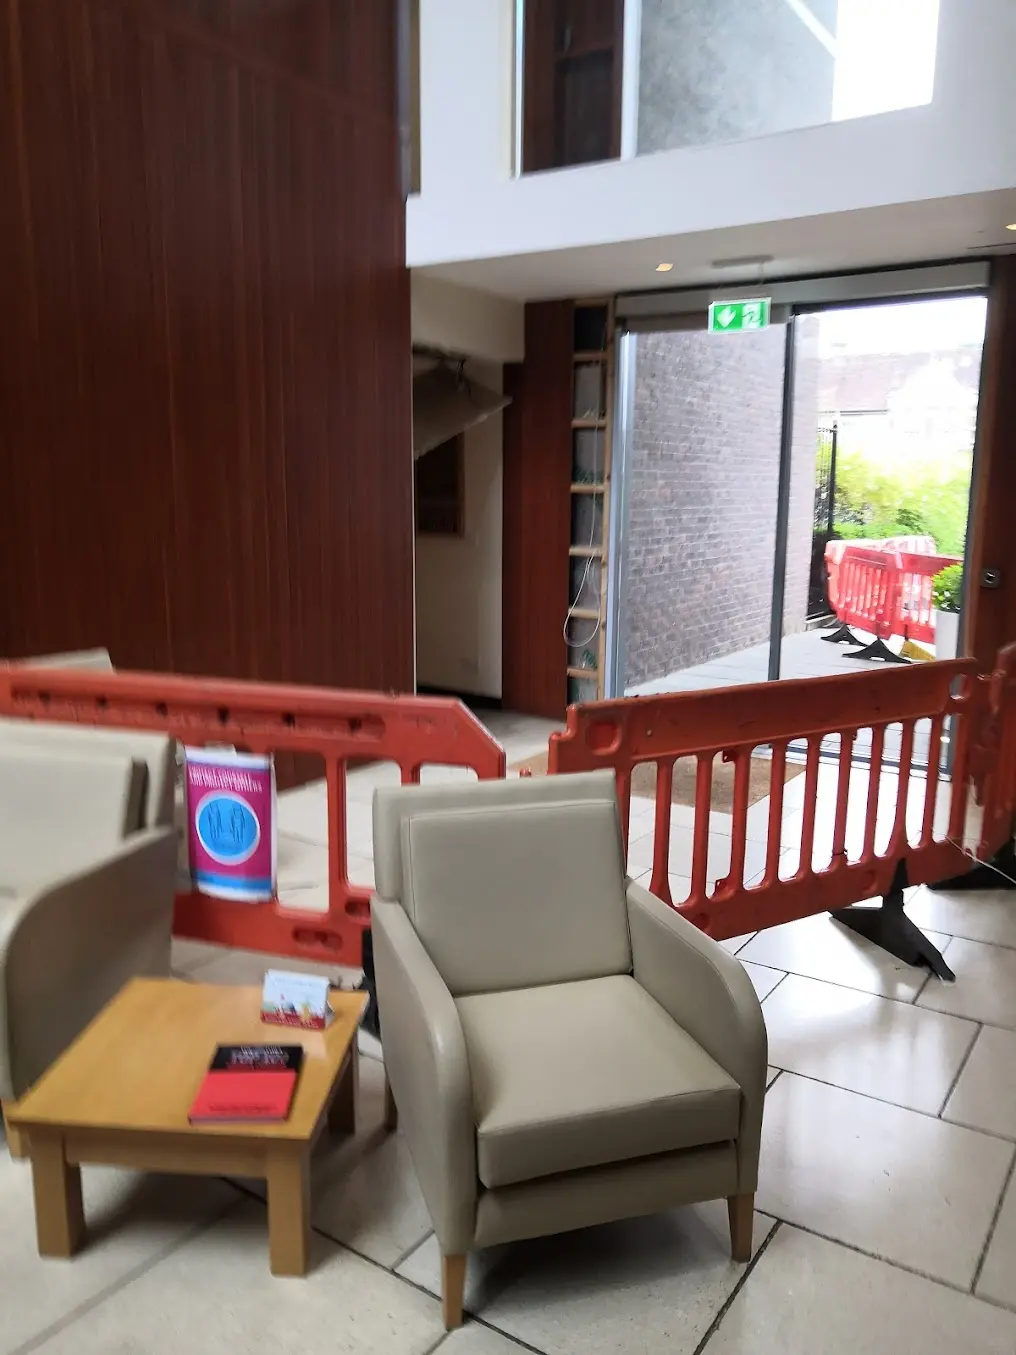 A blurry picture of the broken door in Fitzwilliam: one of the door panes is missing, and the area is surrounded by red barriers. There is a social distancing sign on one of the barriers, but it is too blurry to read.